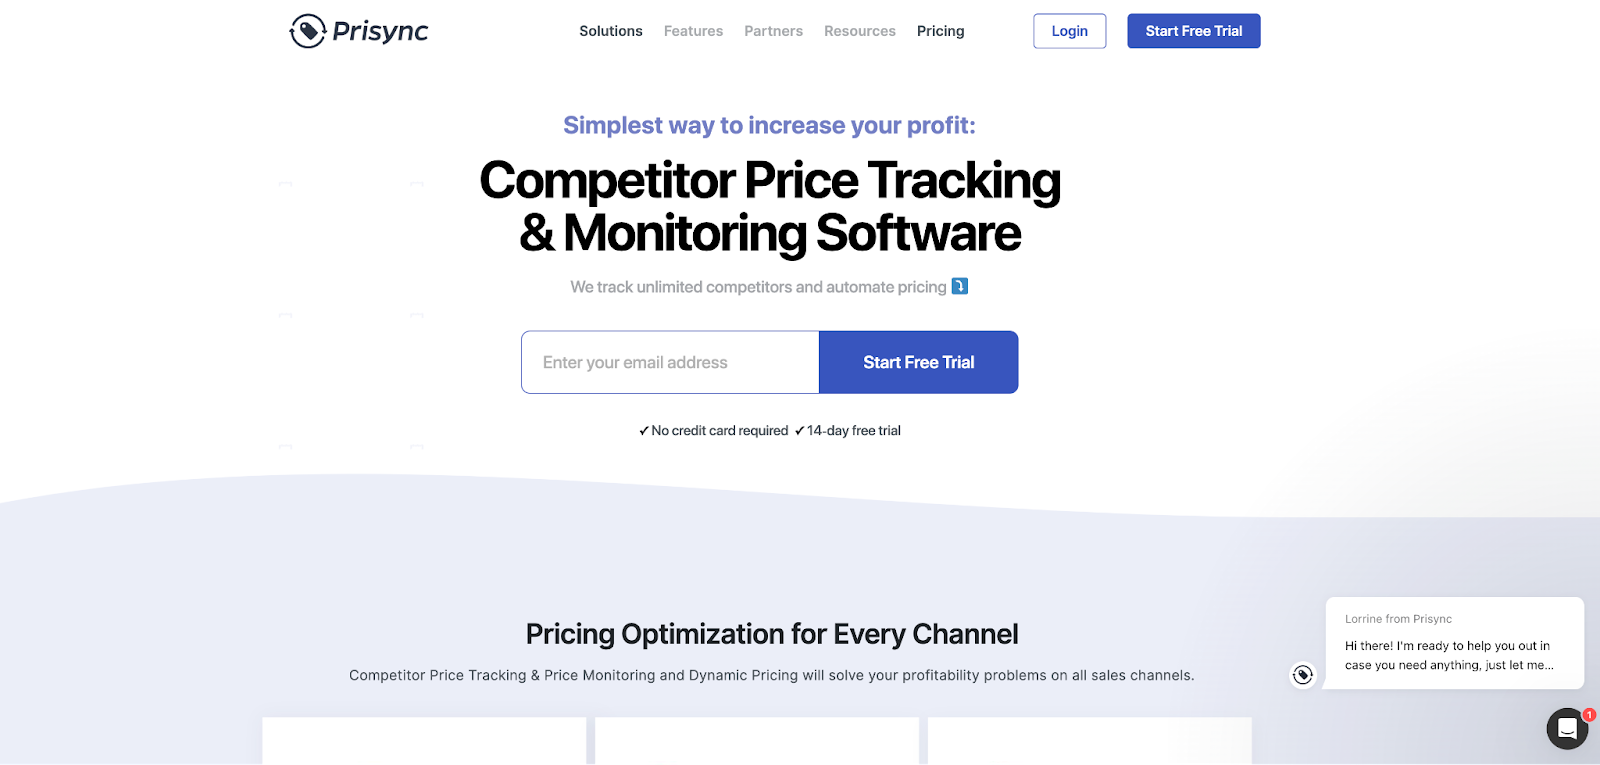 Prisync homepage with prompt to start free trial.